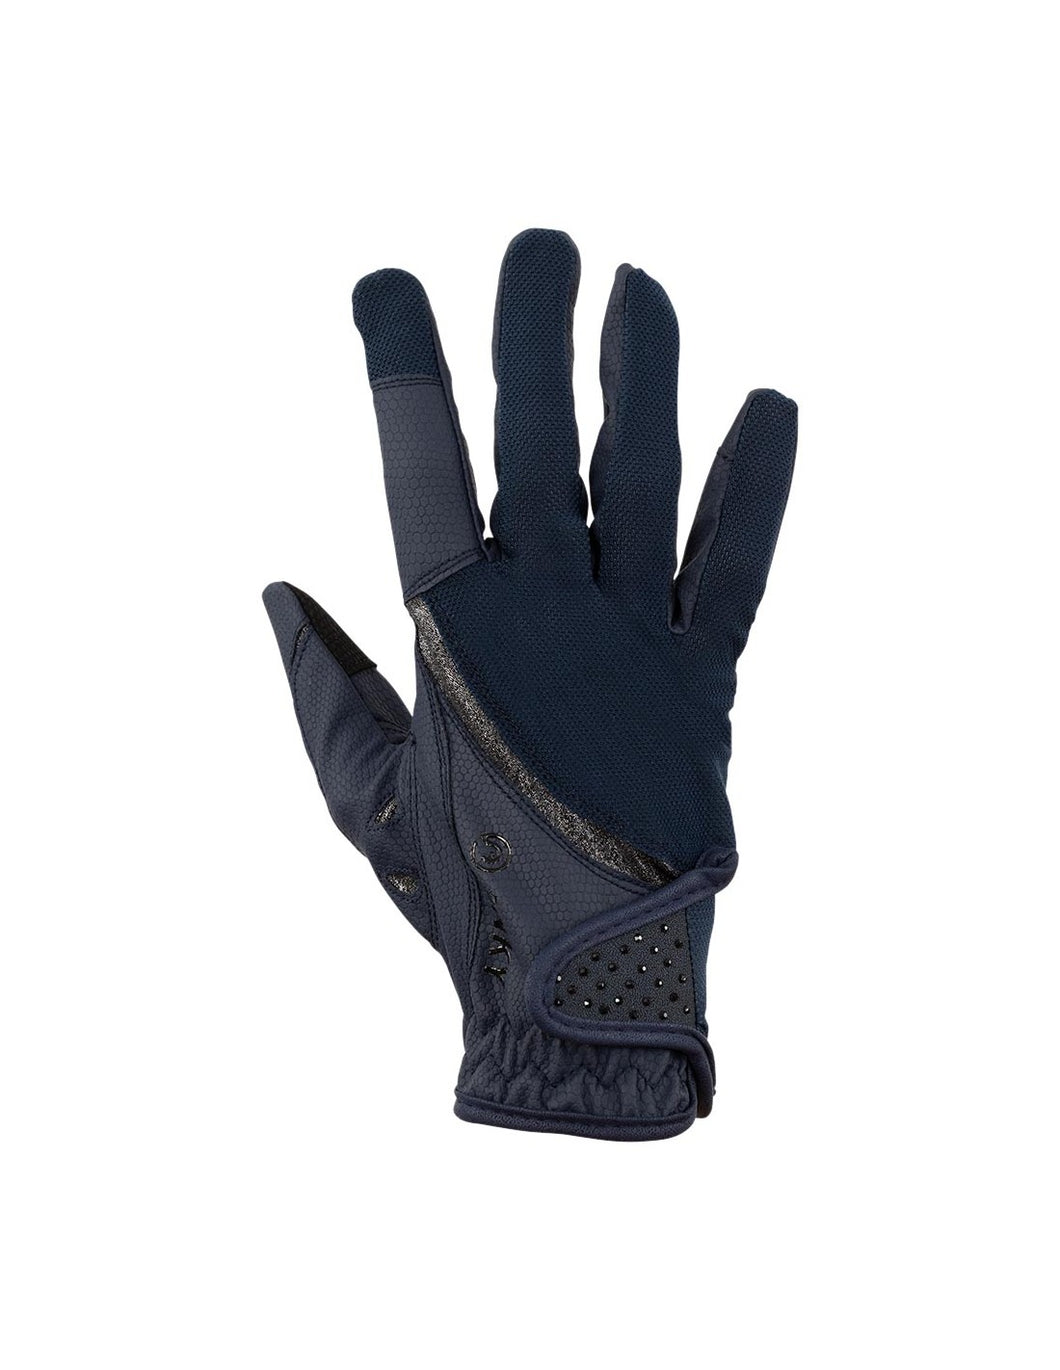 Anky Technical Summer Riding Gloves